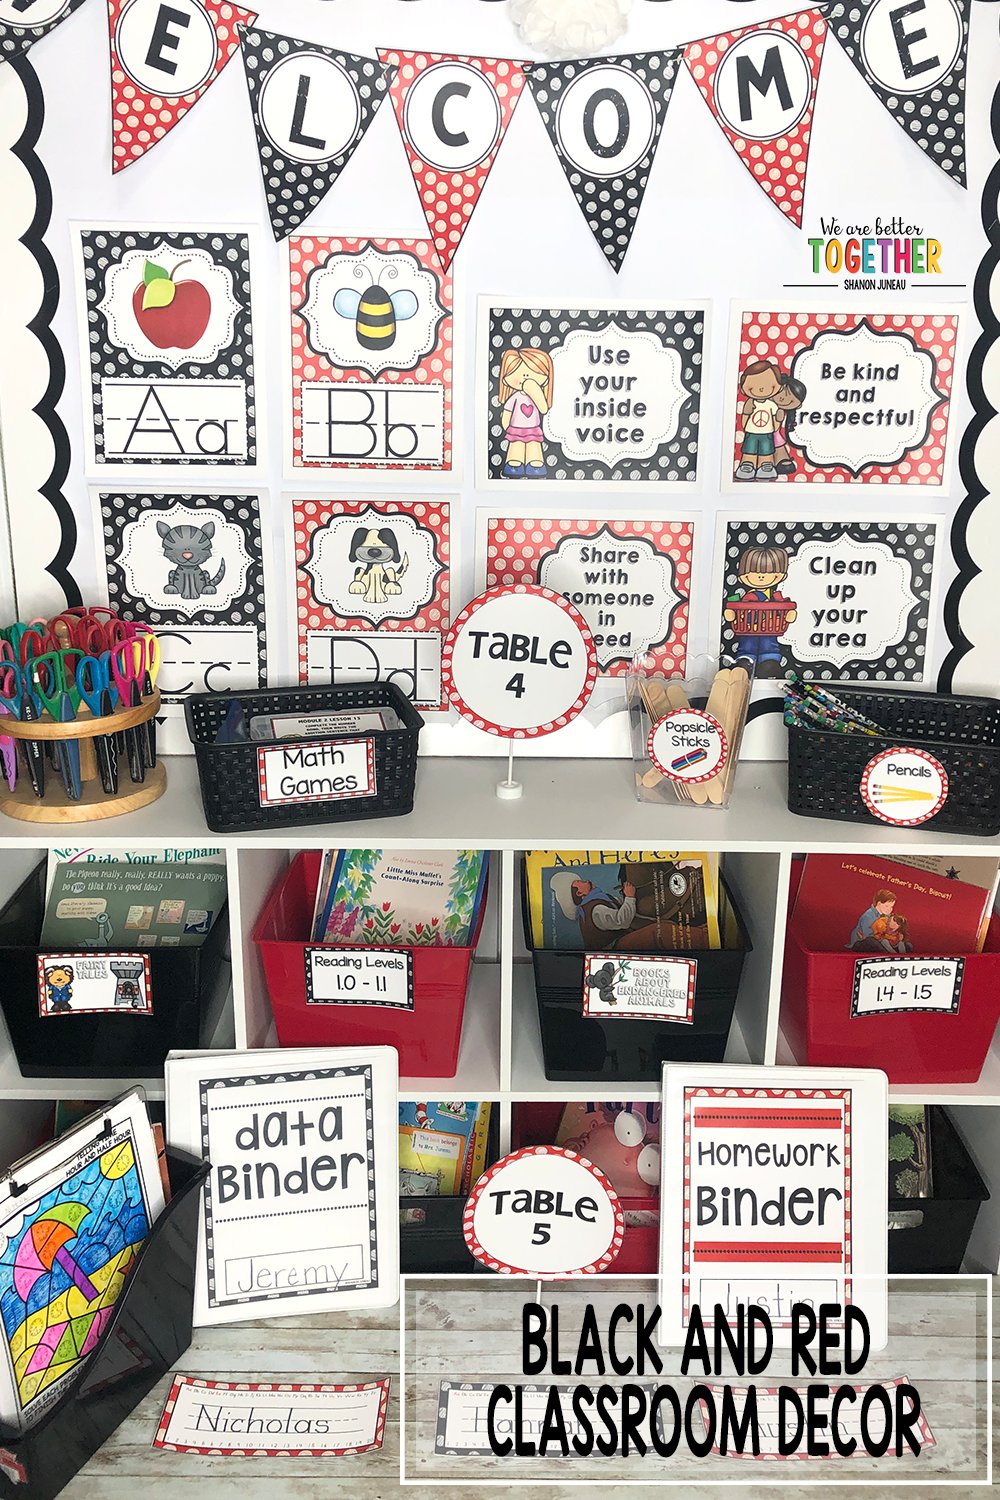 Classroom-decor-red-and-black